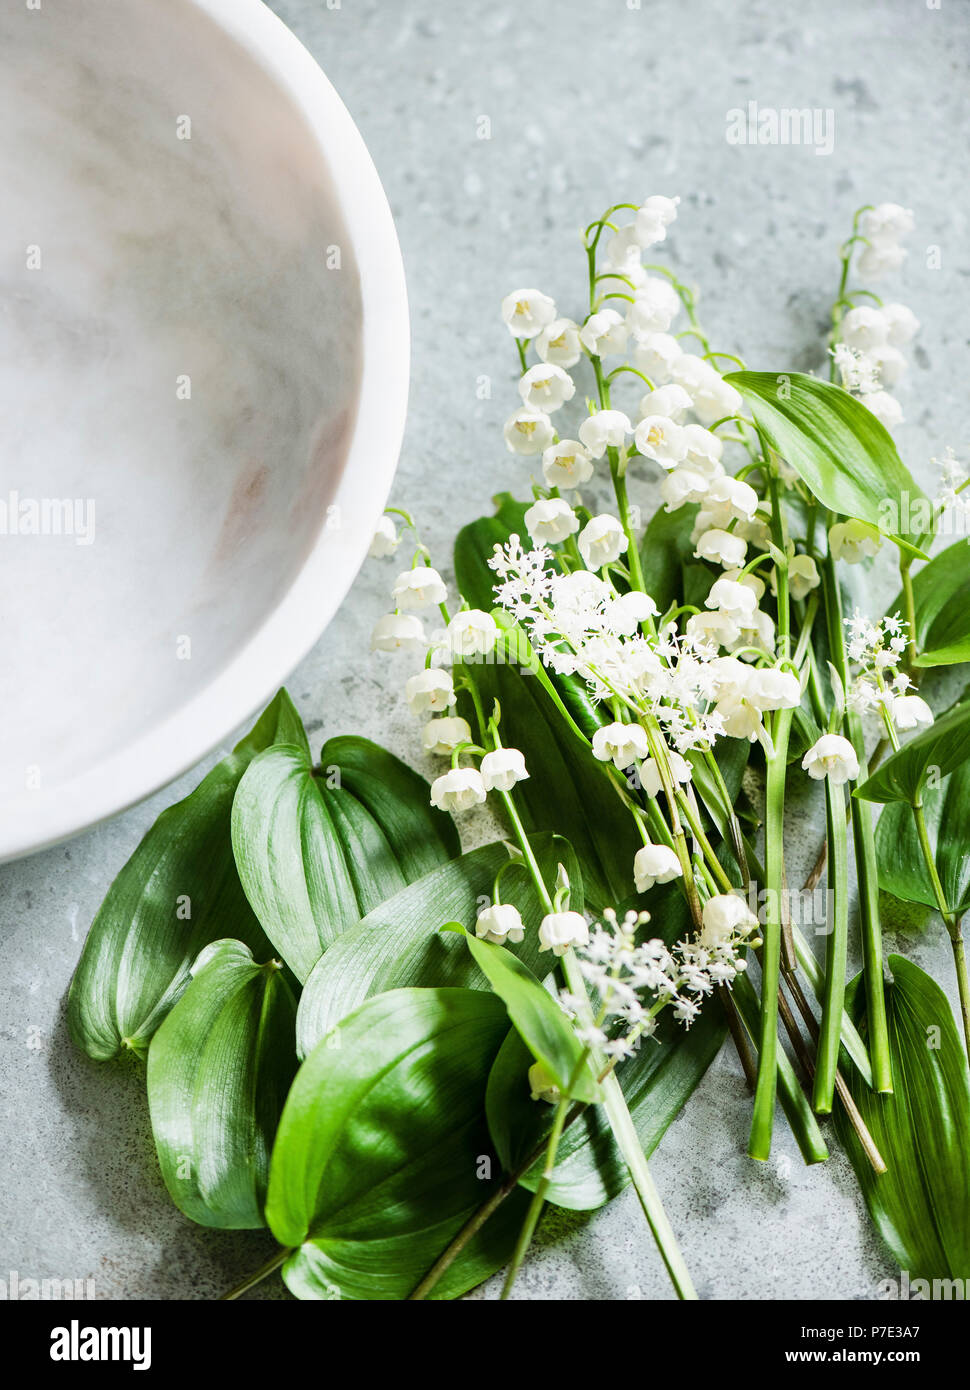 Lily of the valley cut flowers and leaves, overhead view Stock Photo